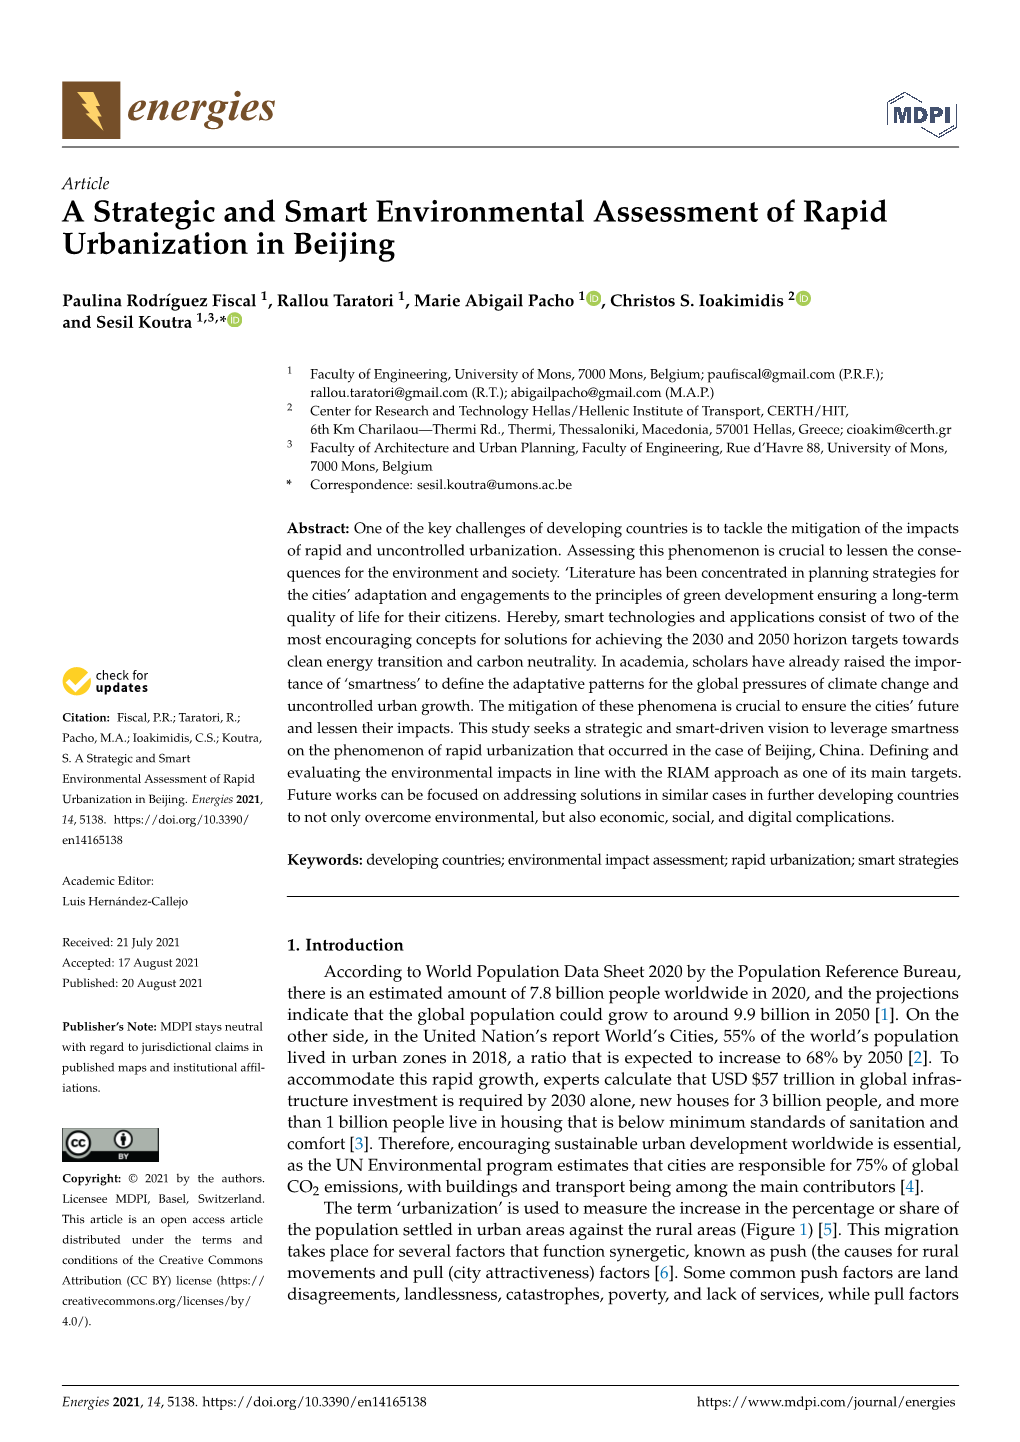 A Strategic and Smart Environmental Assessment of Rapid Urbanization in Beijing